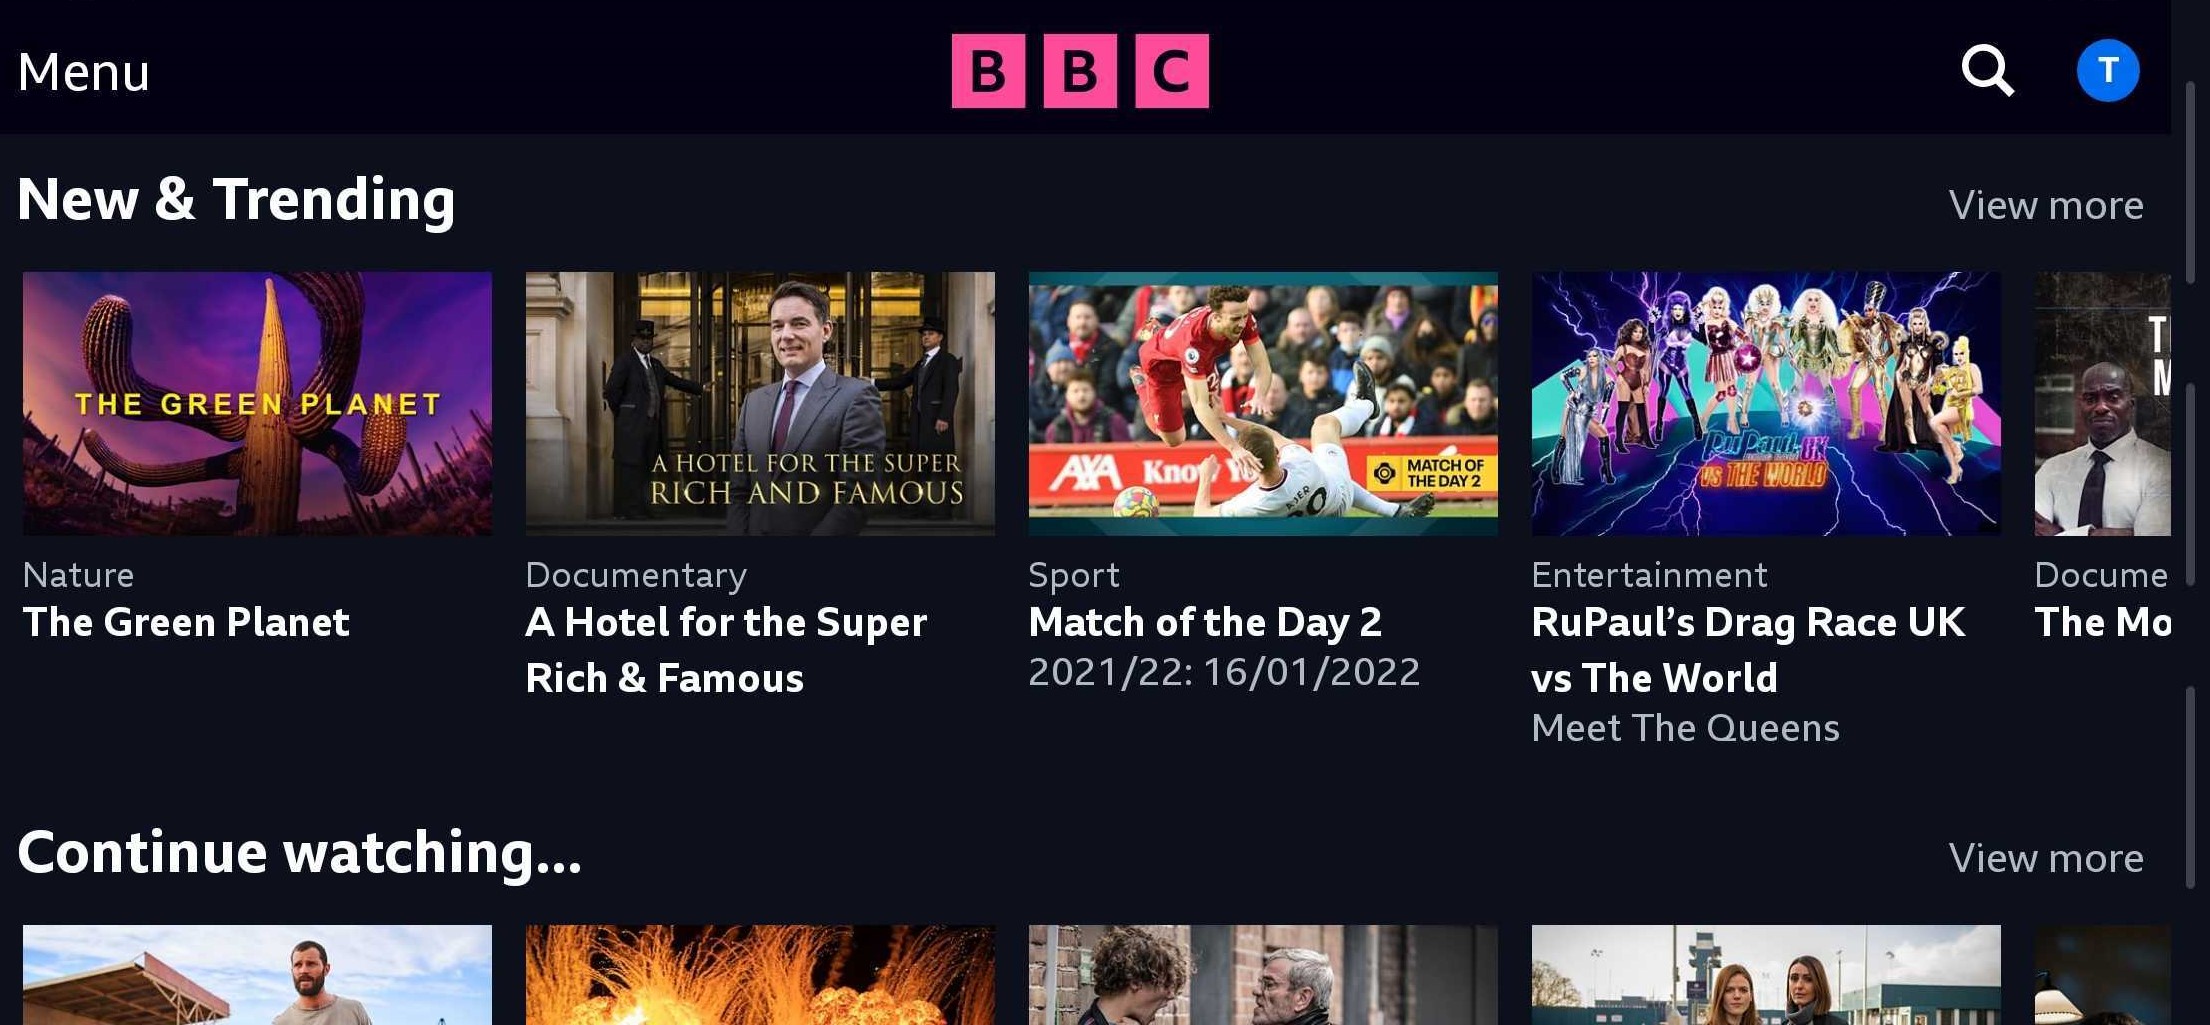 download bbc on android